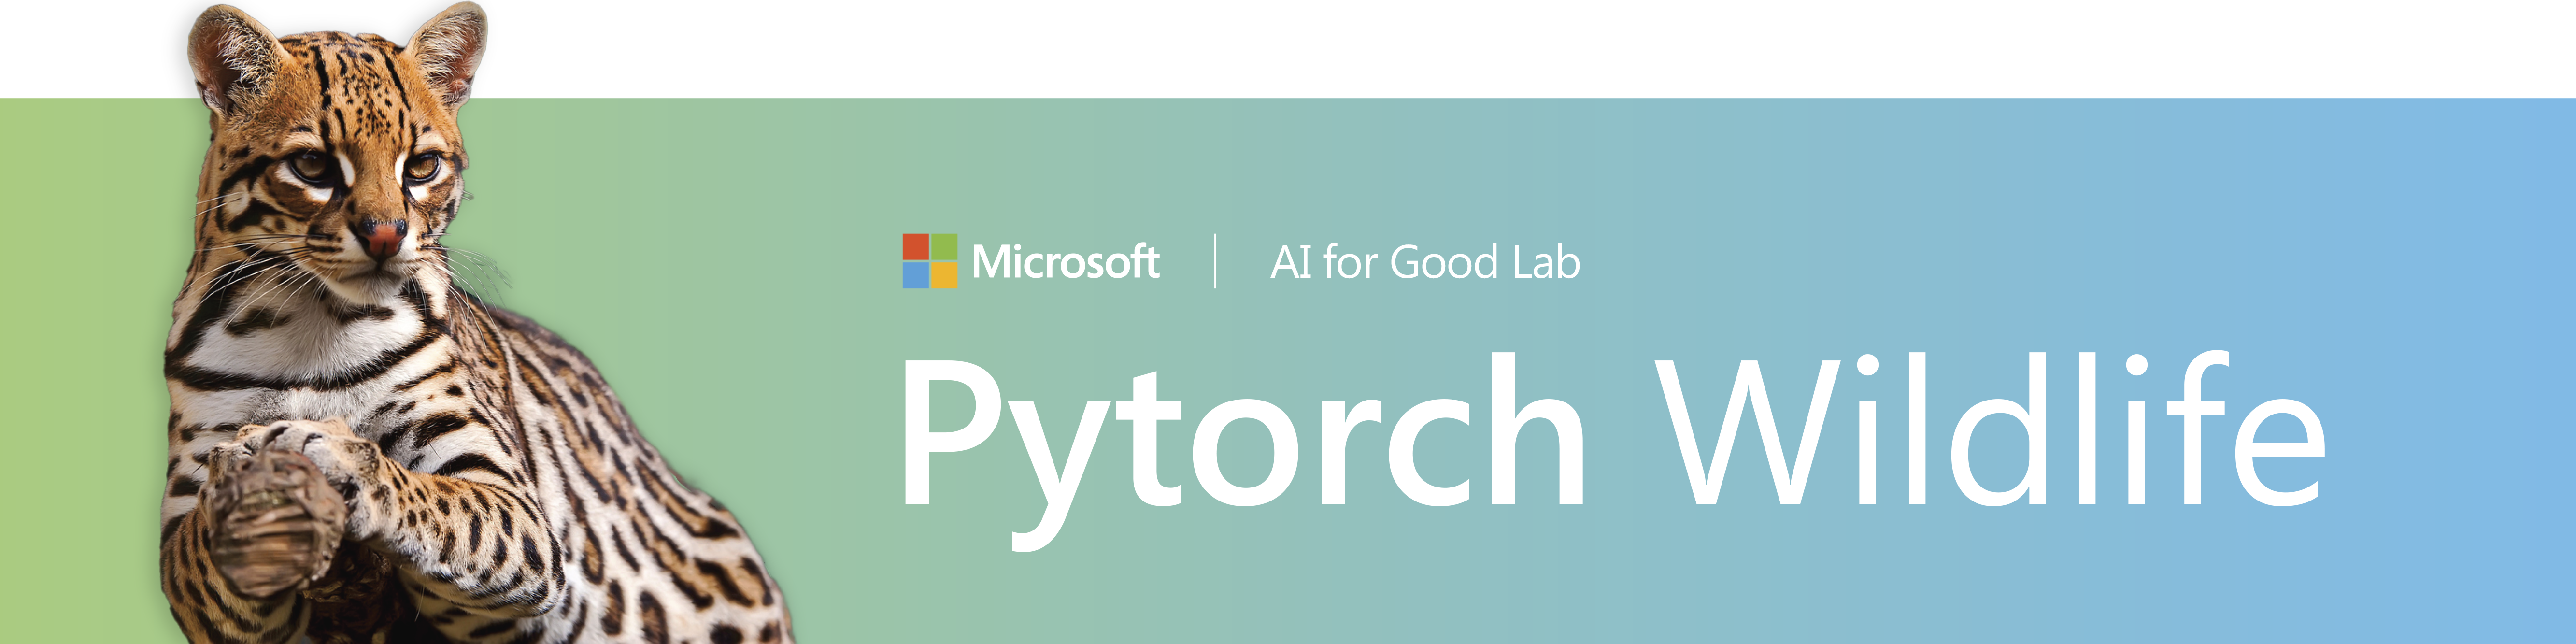 MegaDetector and Pytorch Wildlife